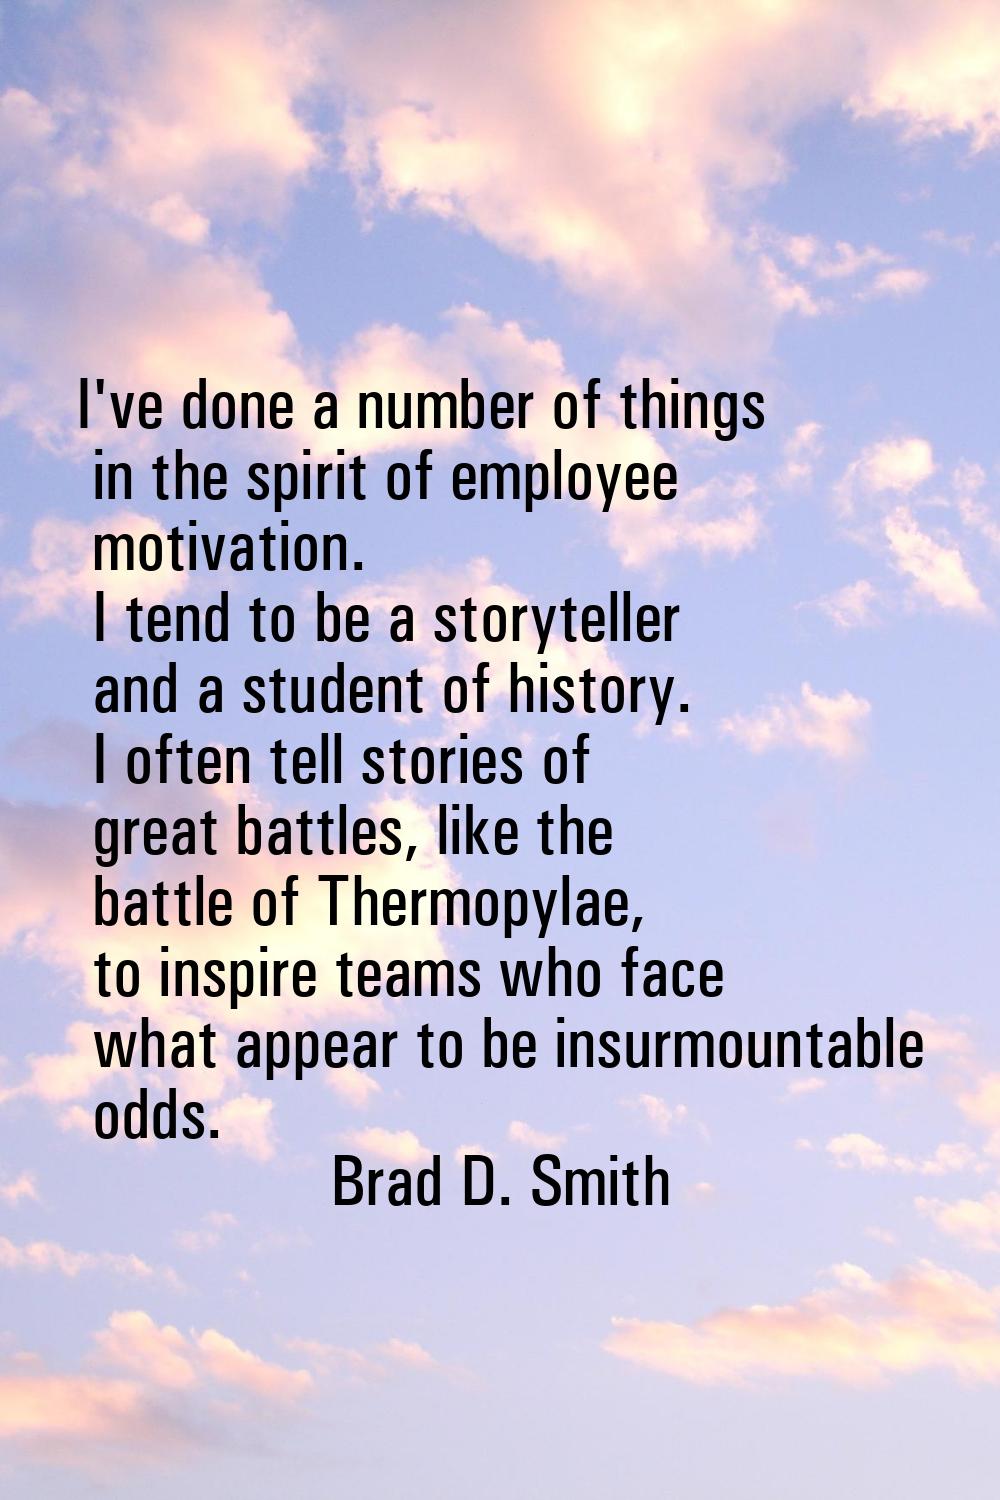 I've done a number of things in the spirit of employee motivation. I tend to be a storyteller and a